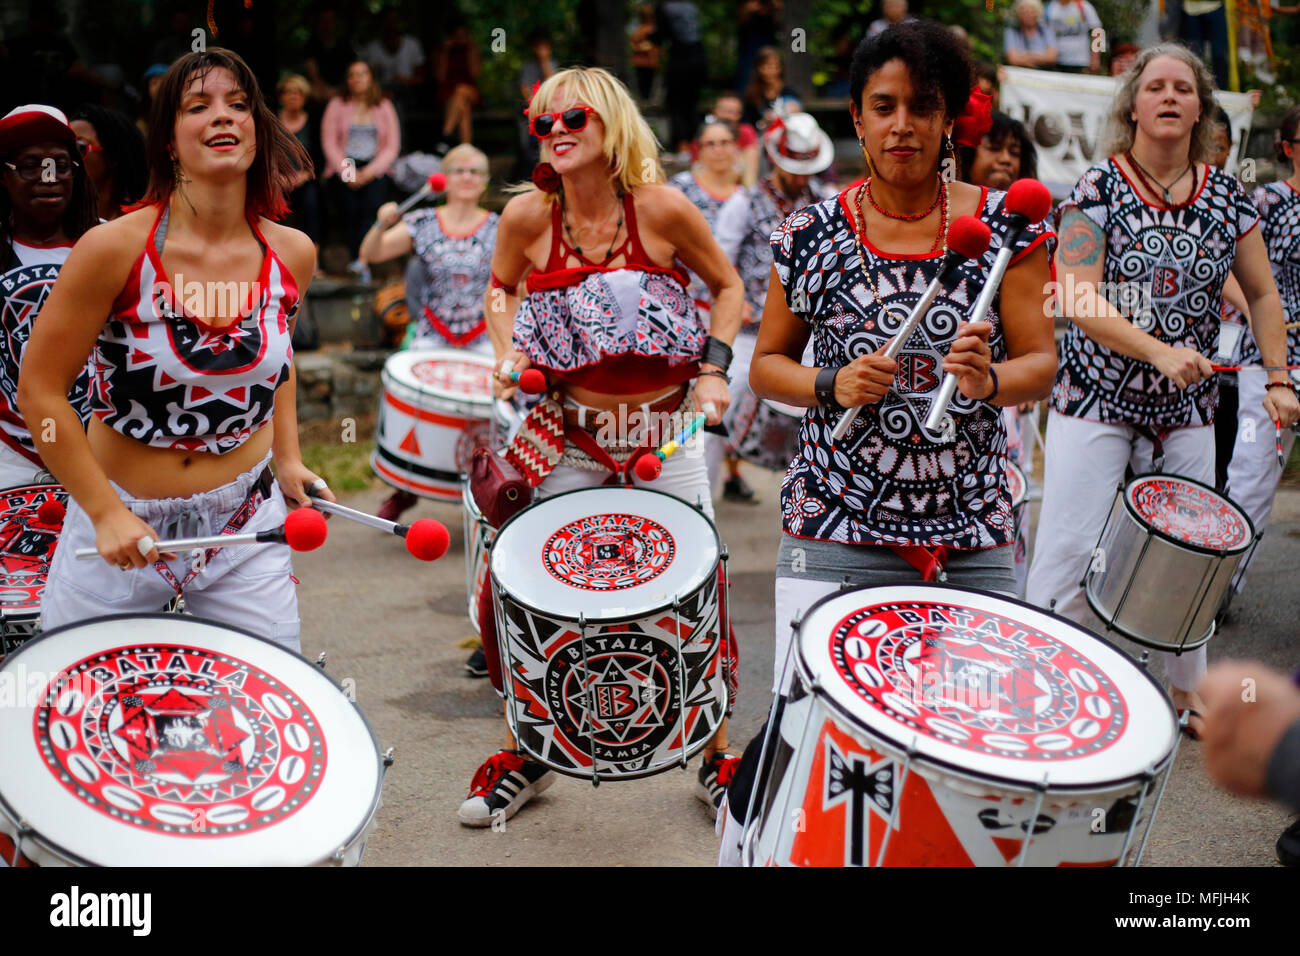 A group of women drumming with Batala NYC at a community garden celebration in New York, NY. October 15, 2017 Stock Photo